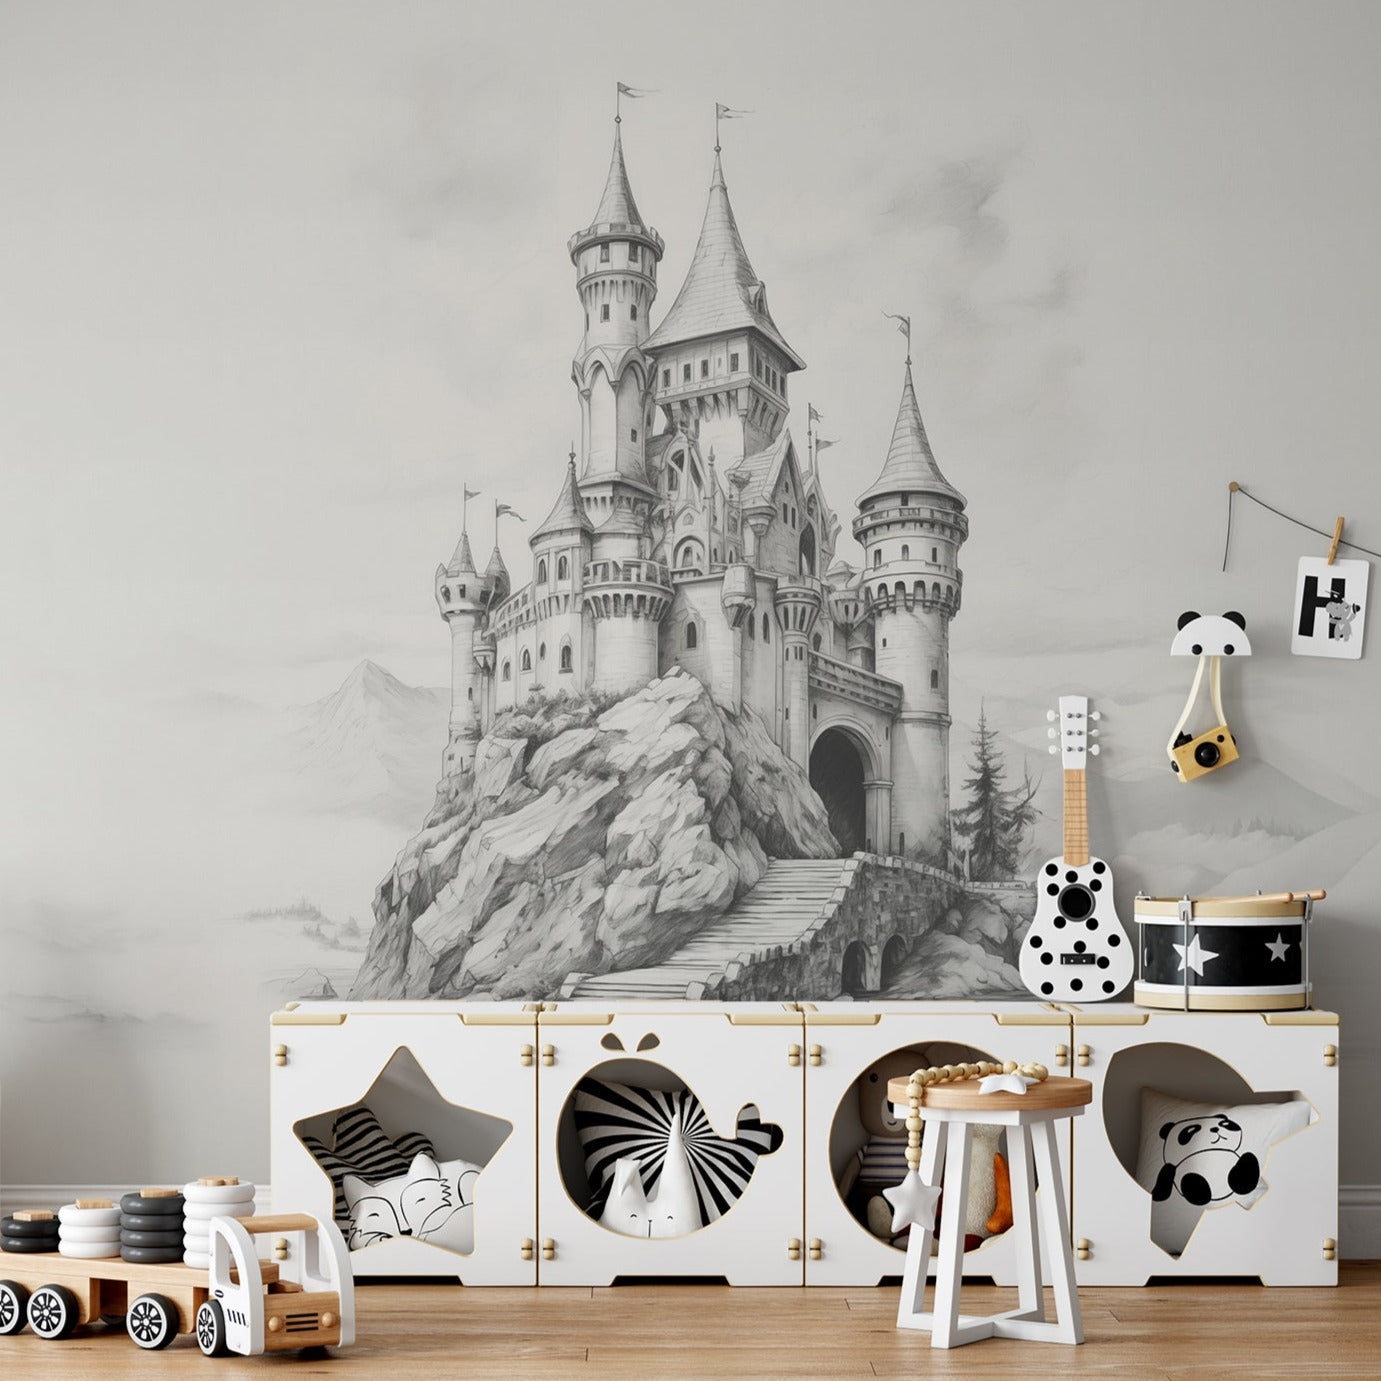 Cloud Castle wallpaper mural in a children's playroom with storage boxes, toys, and decorative items.